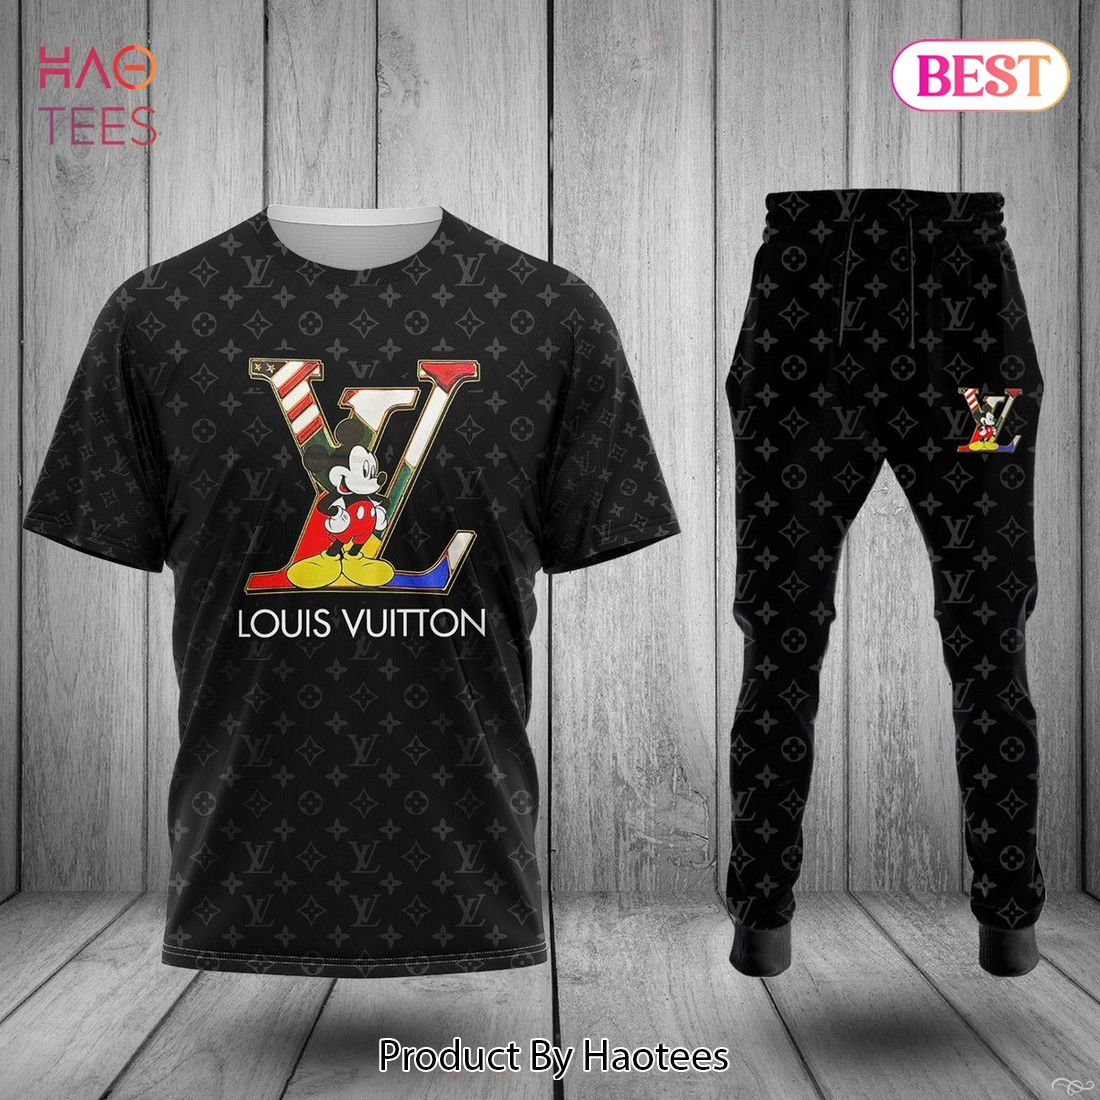 HOT Louis Vuitton Mickey Mouse Luxury Brand T-Shirt And Pants Limited Edition